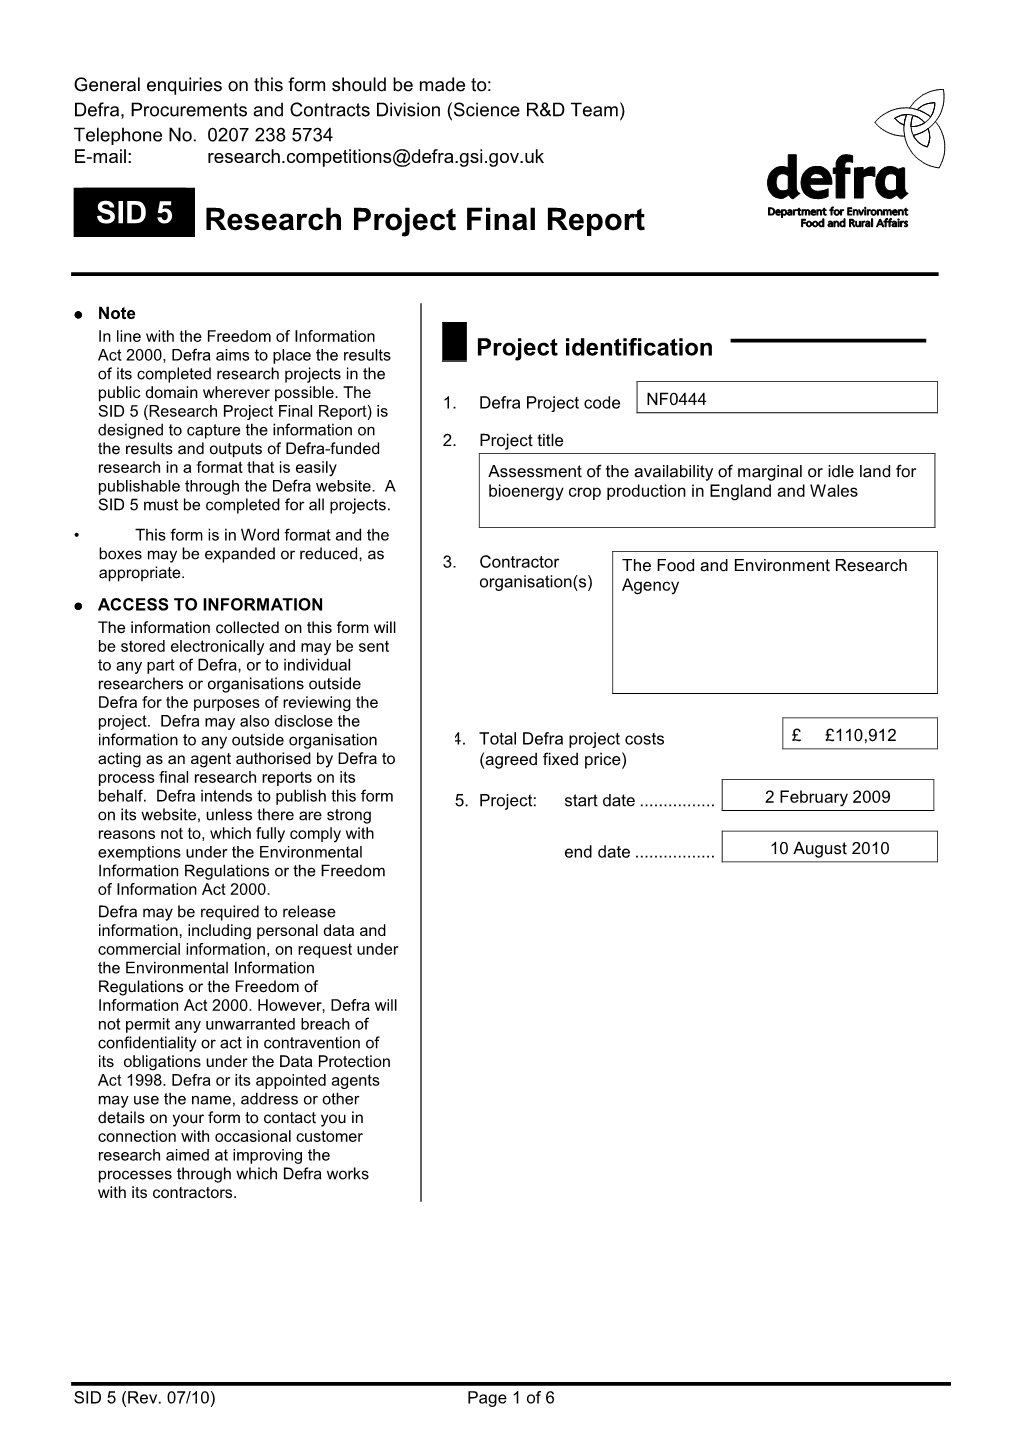 SID 5 Research Project Final Report